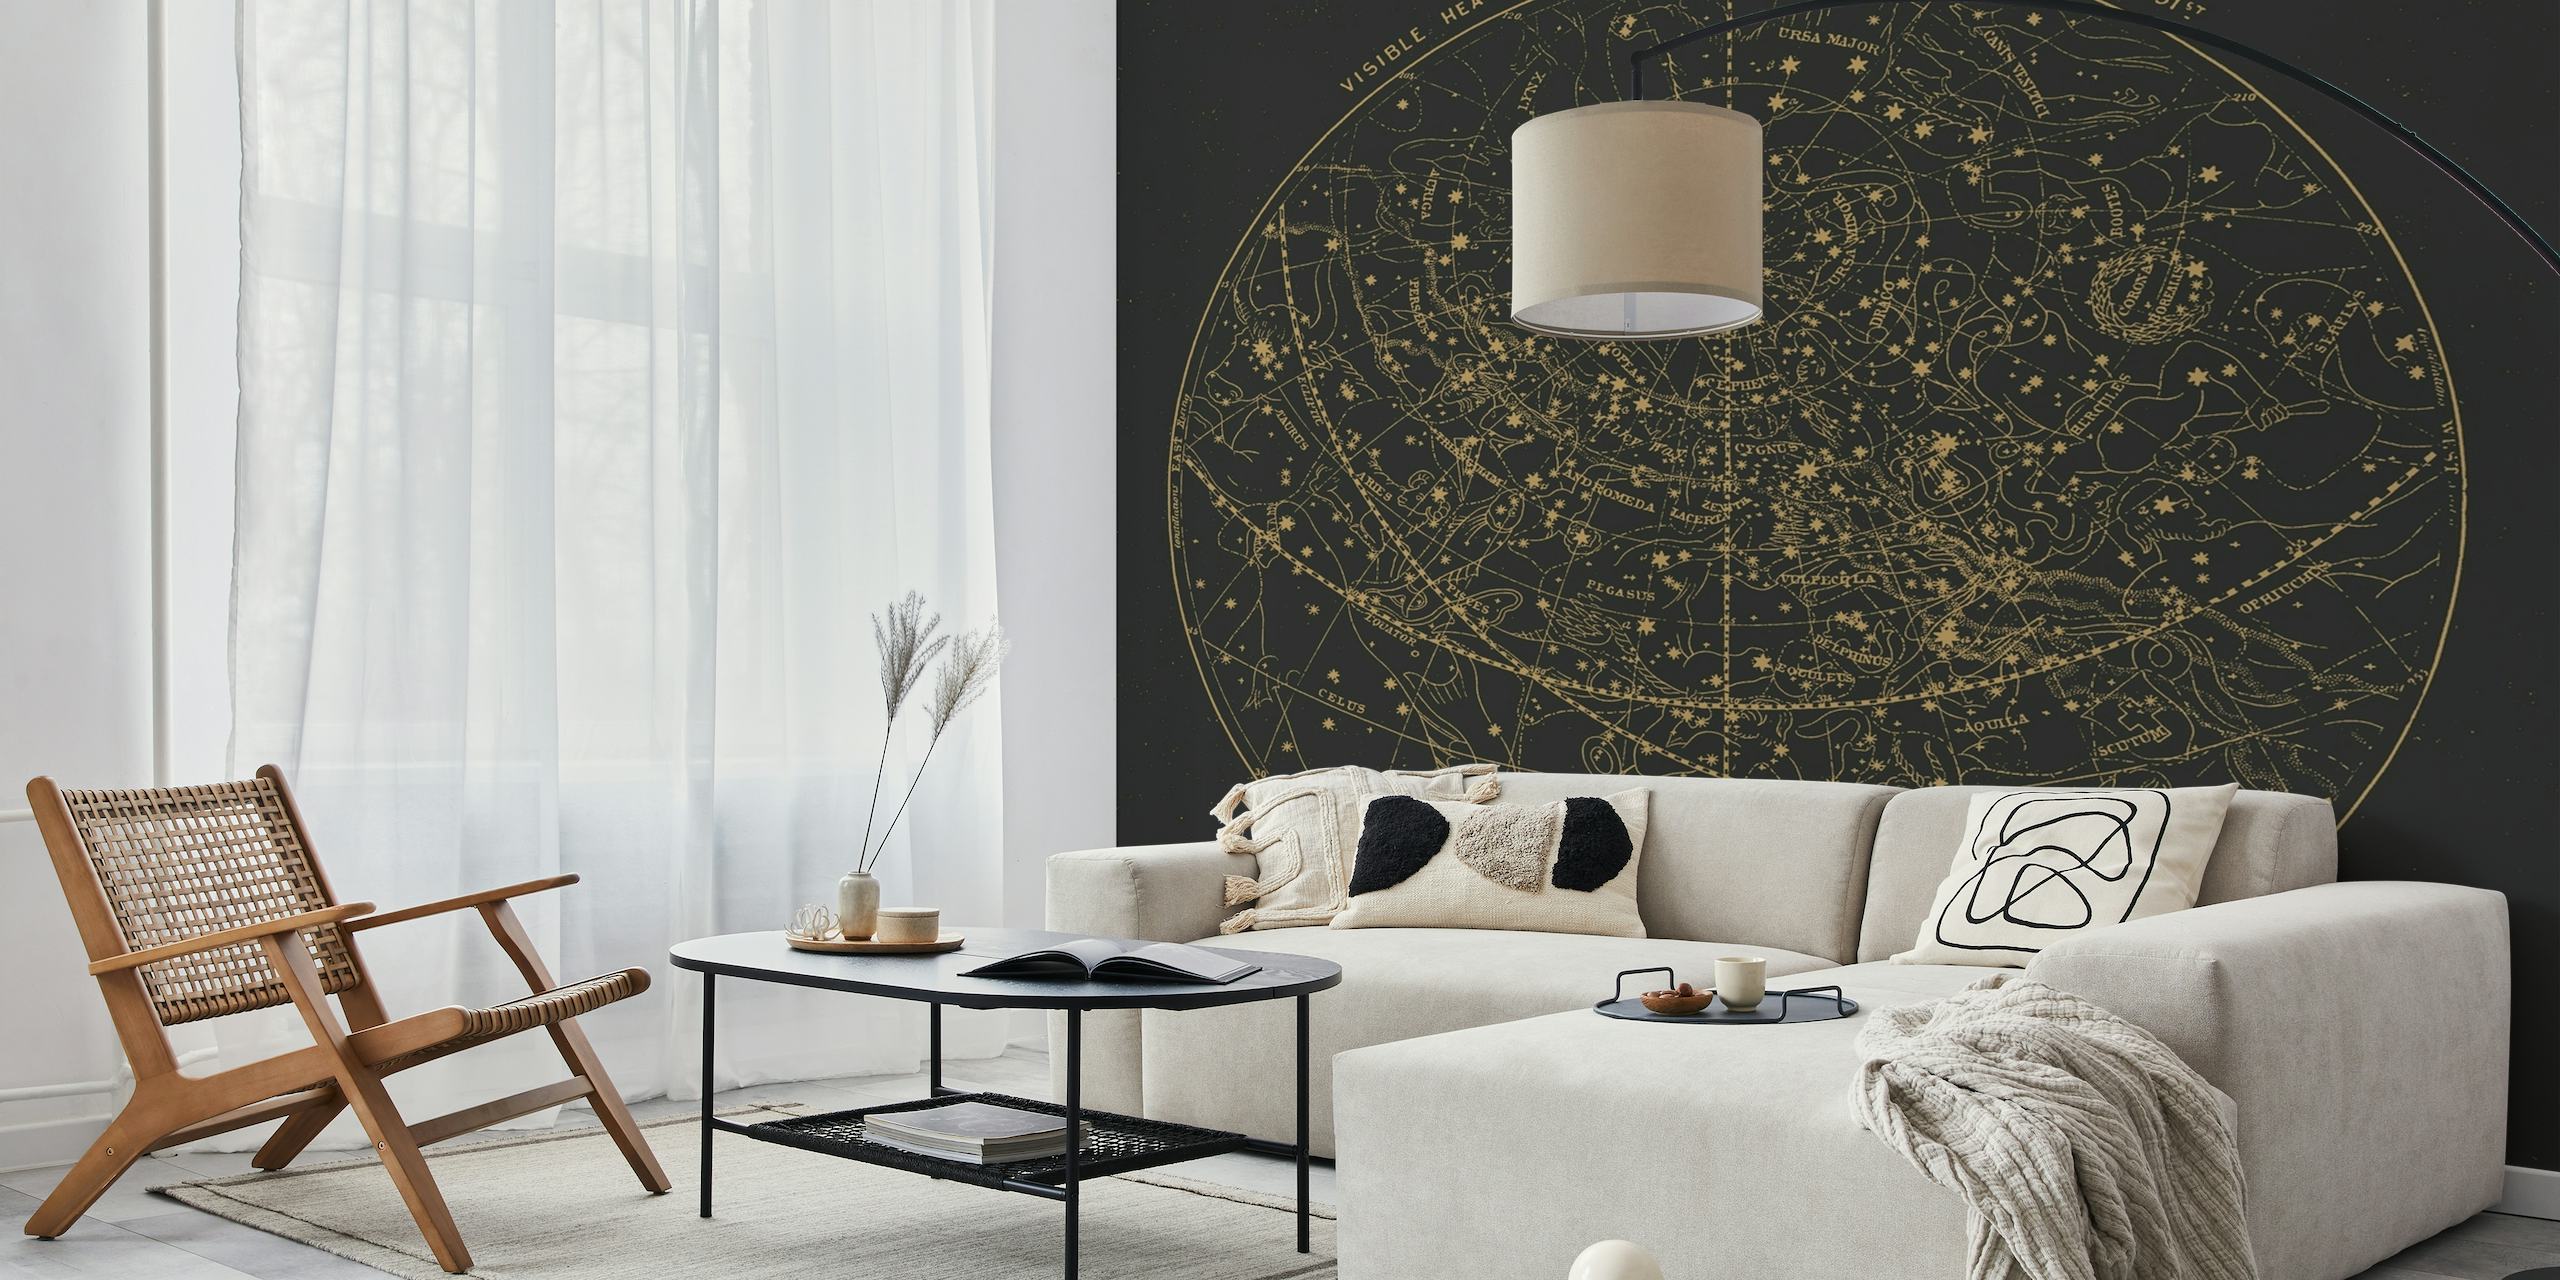 Celestial star map wall mural in dark colors from happywall.com